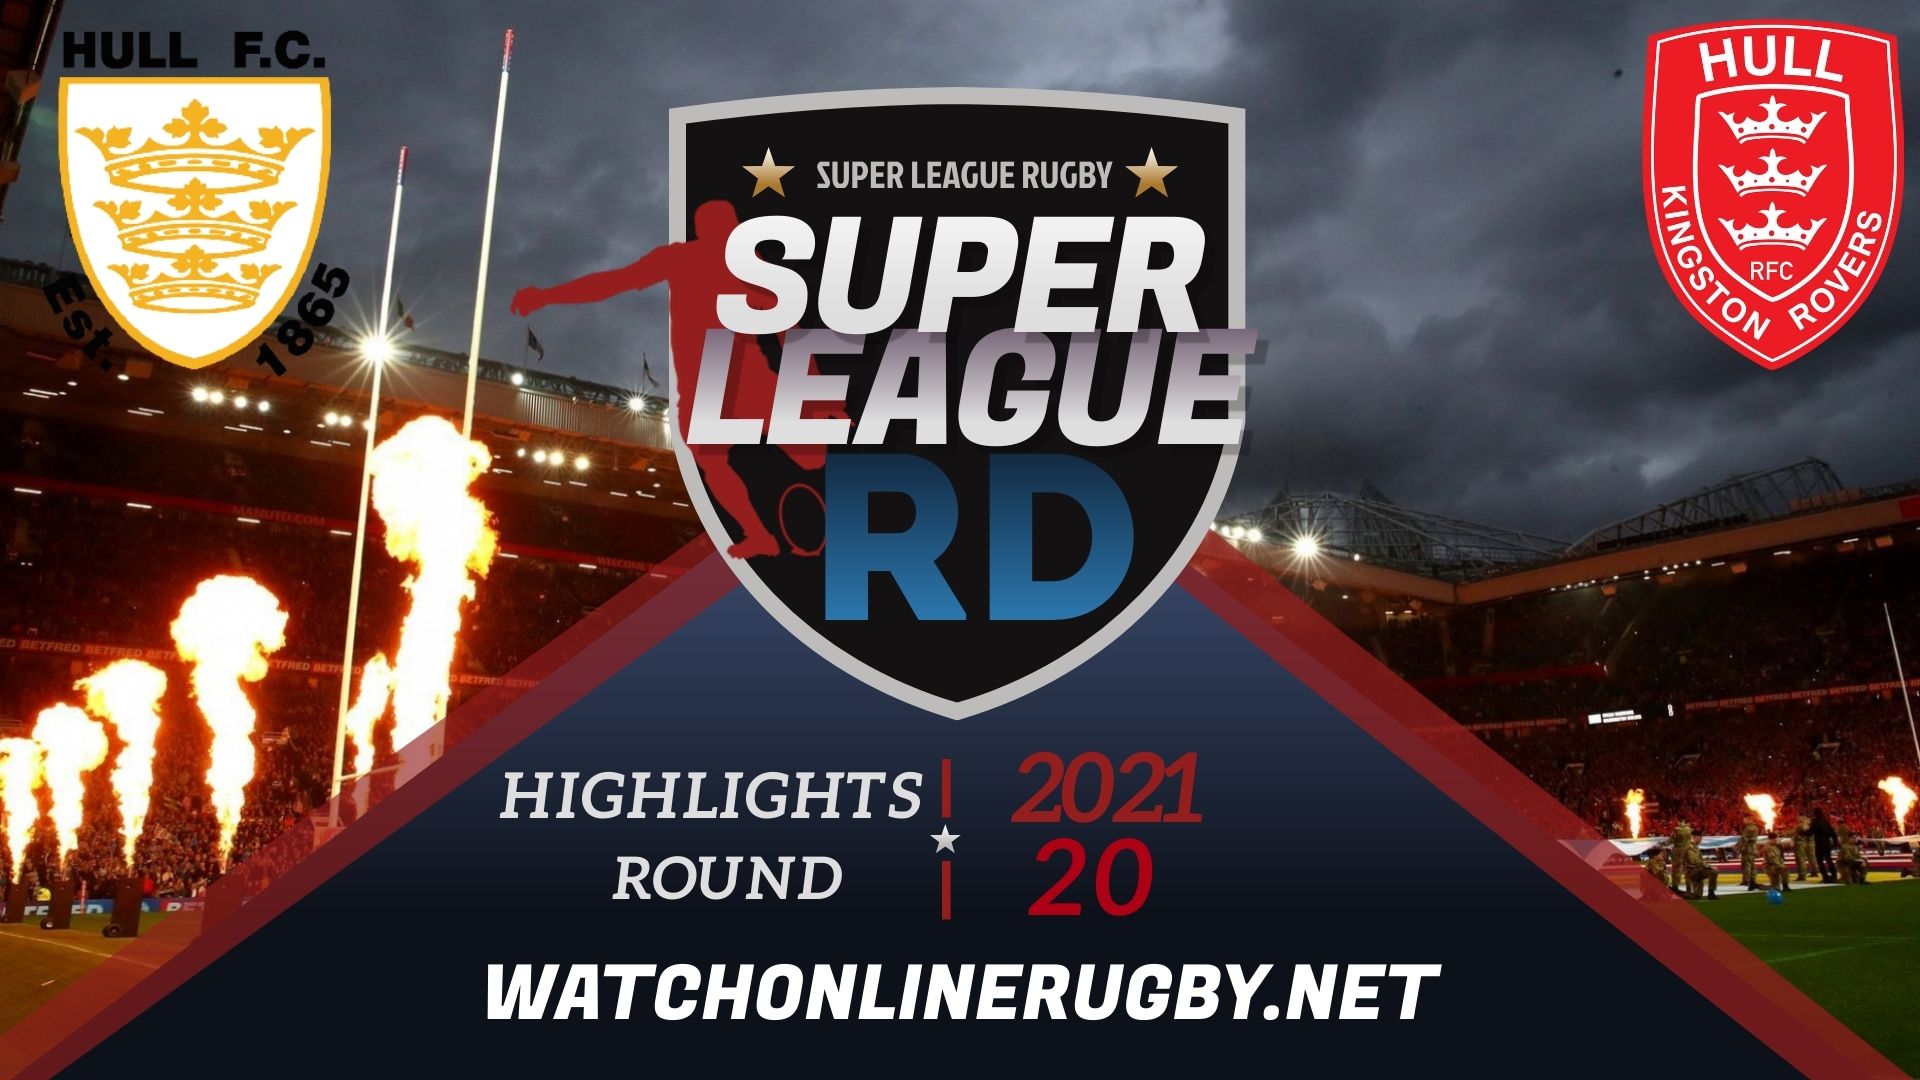 Hull Fc Vs Hull KR Super League Rugby 2021 RD 20